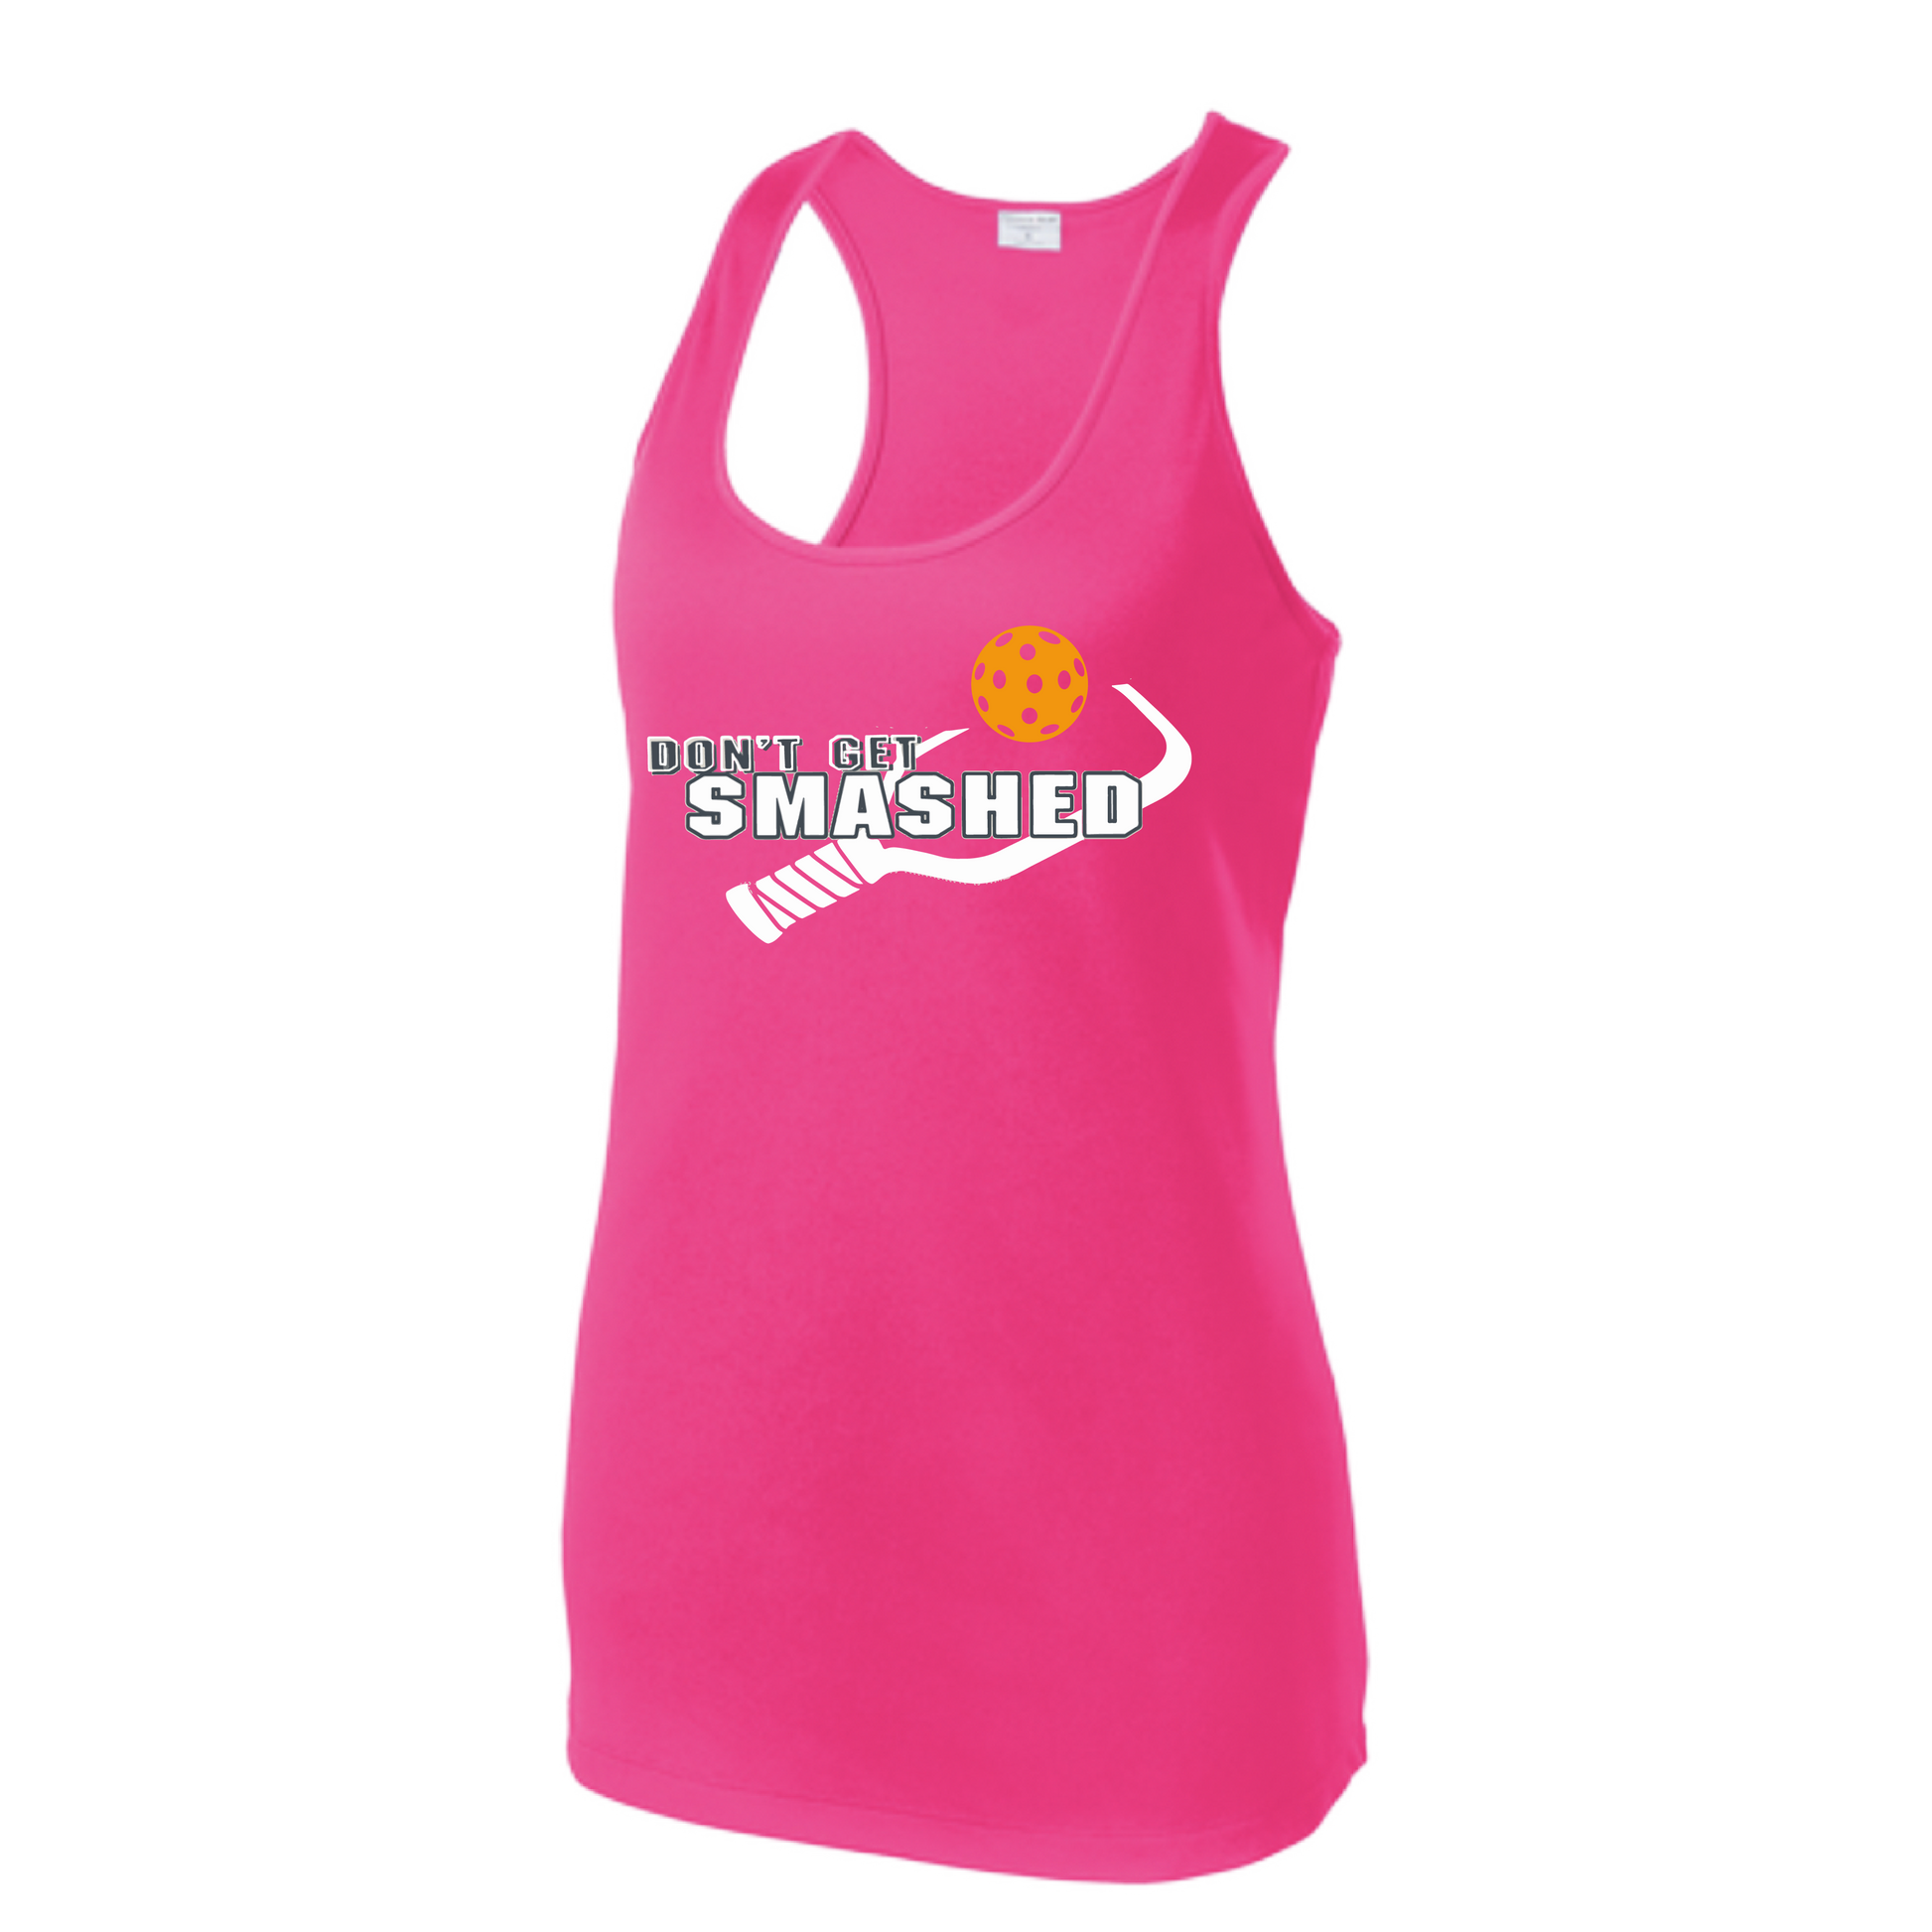   Create a bold statement in this ultra-soft Women's Pickleball Racerback Shirt! Featuring a sassy blend of colors - cyan, orange, and pink - this moisture wicking fabric and PosiCharge technology keep colors vibrant. Highly breathable and lightweight, it won't weigh you down but sure will turn heads!